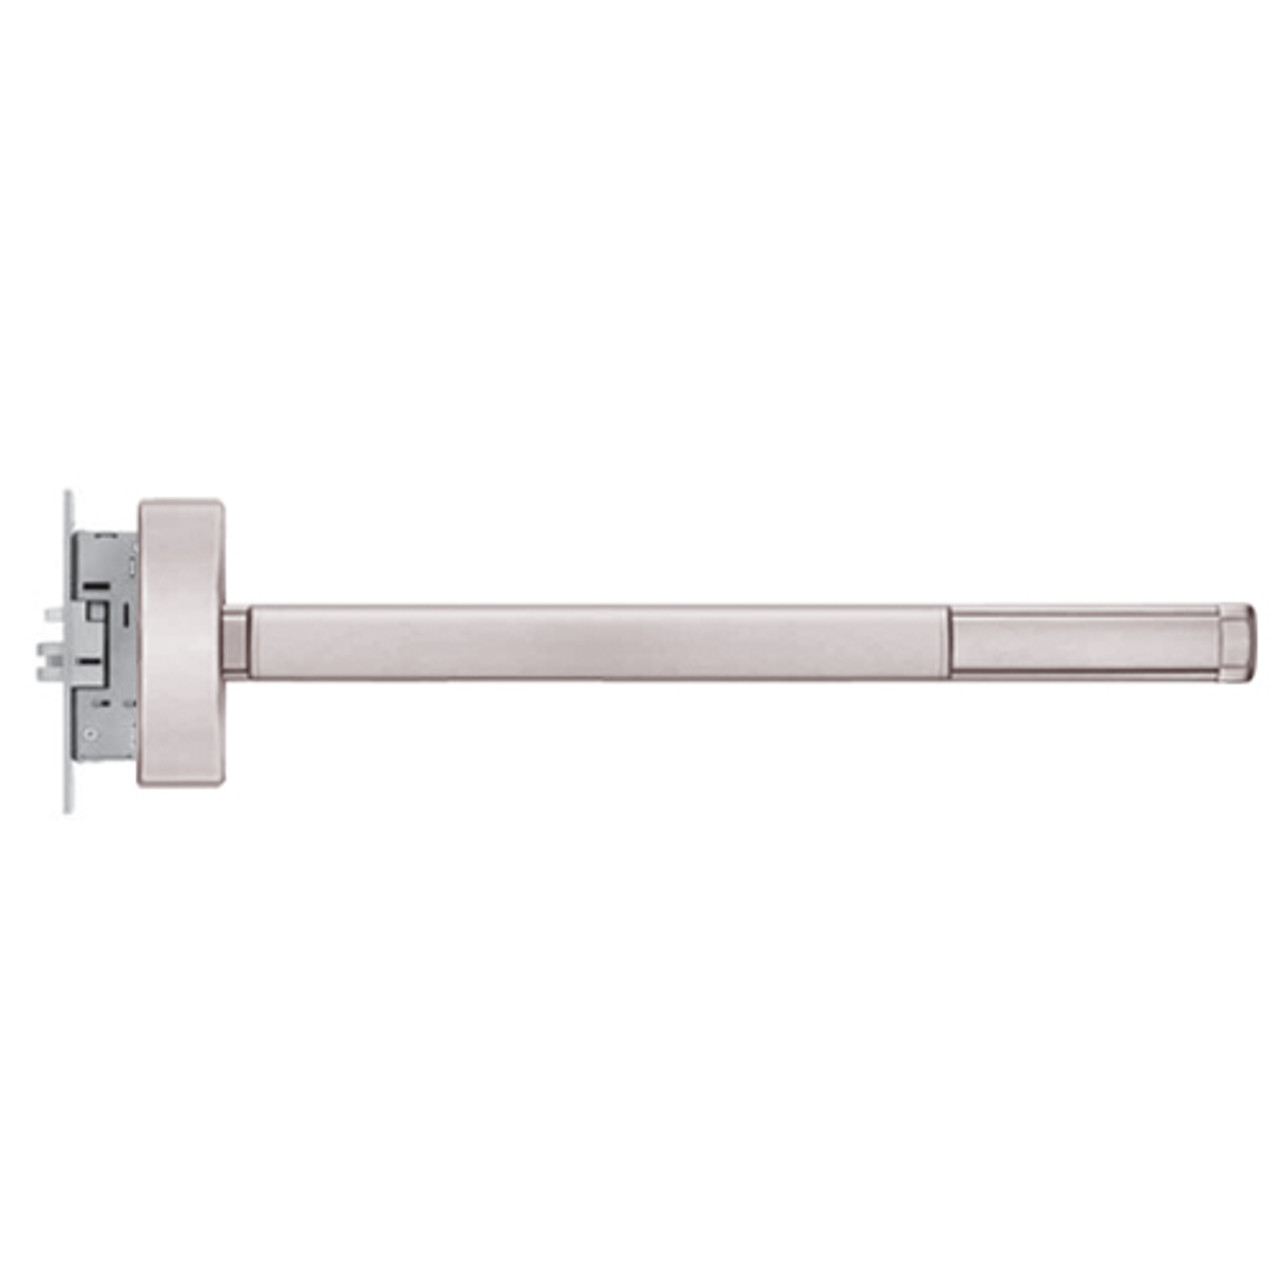 TS2303-RHR-628-36 PHI 2300 Series Apex Mortise Exit Device with Touchbar Monitoring Switch Prepped for Key Retracts Latchbolt in Satin Aluminum Finish